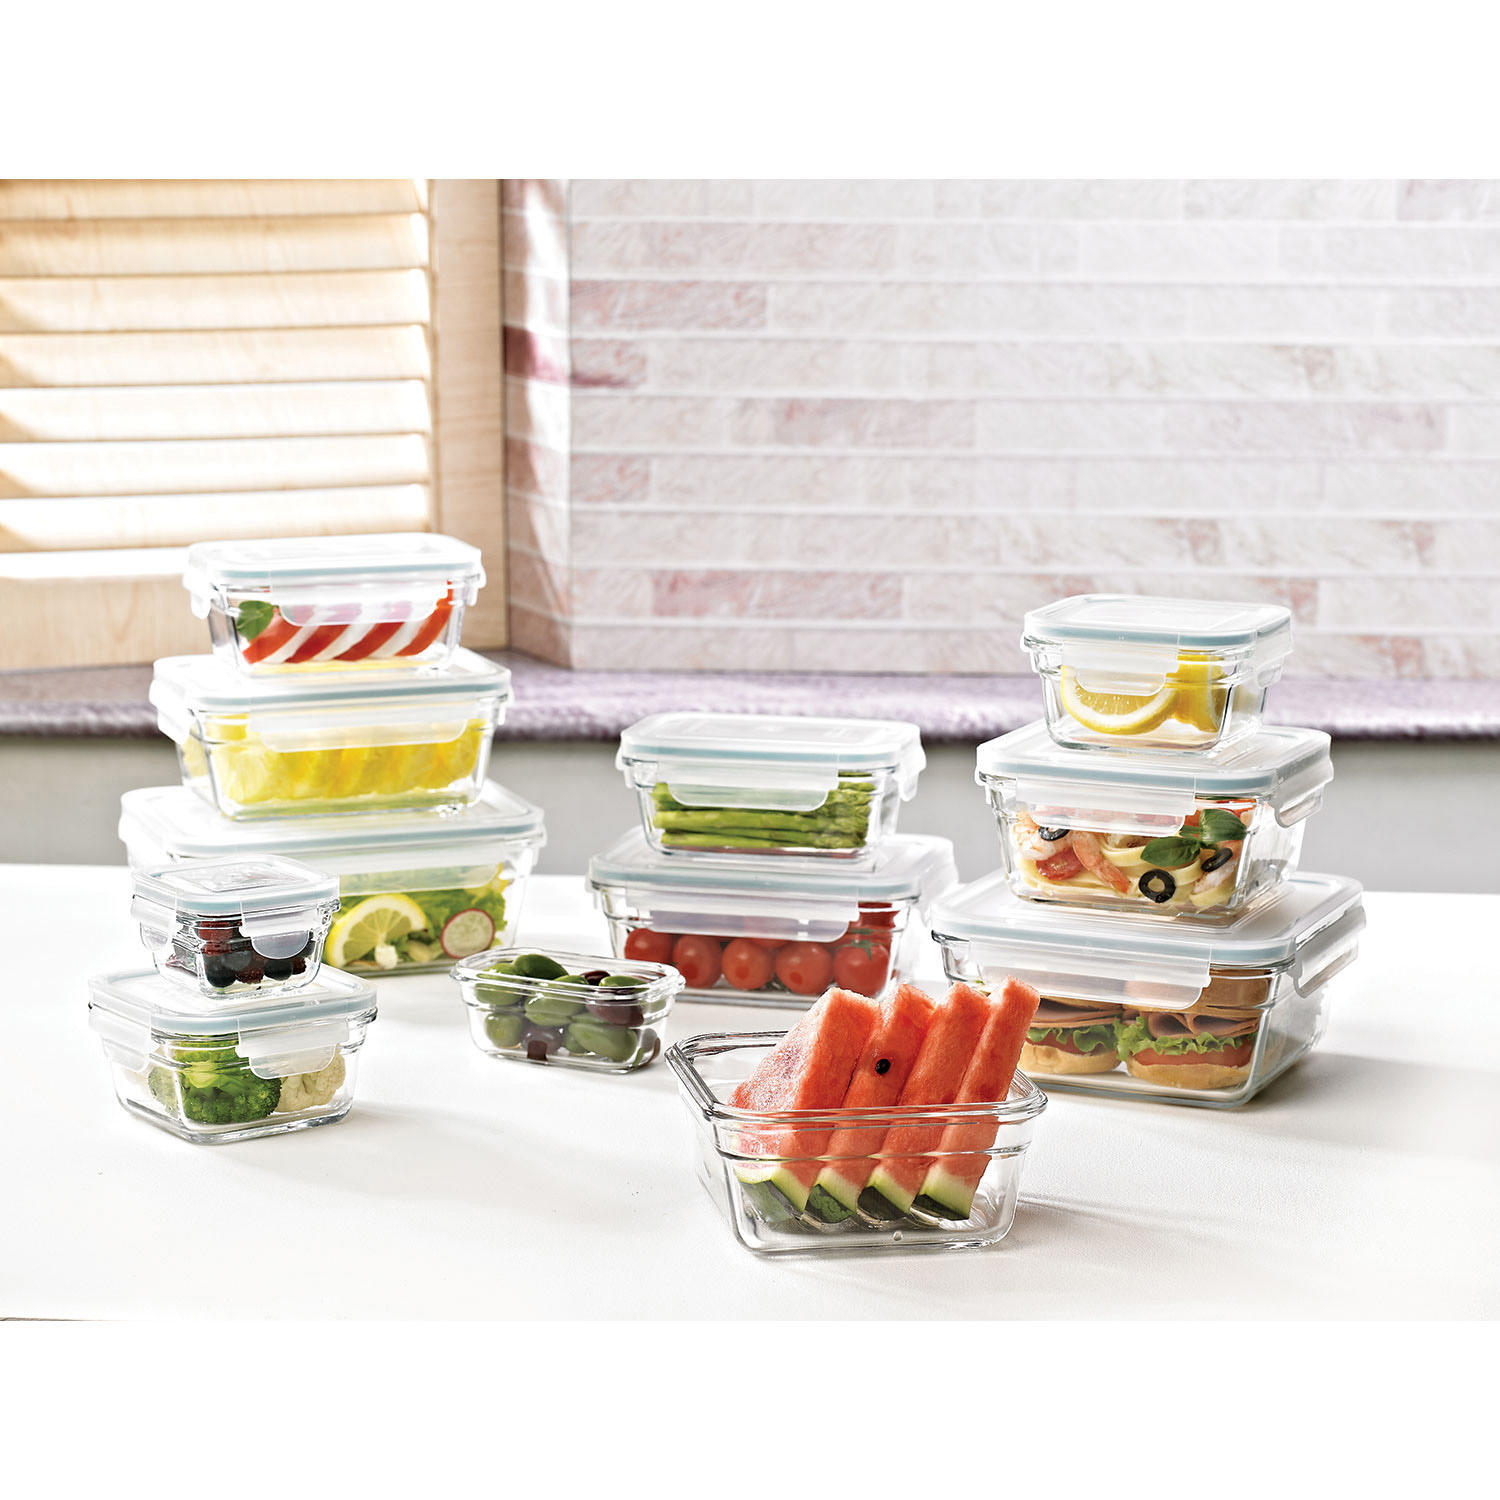 Member’s Mark 24-Piece Glass Food Storage Set by Glasslock for $19.98